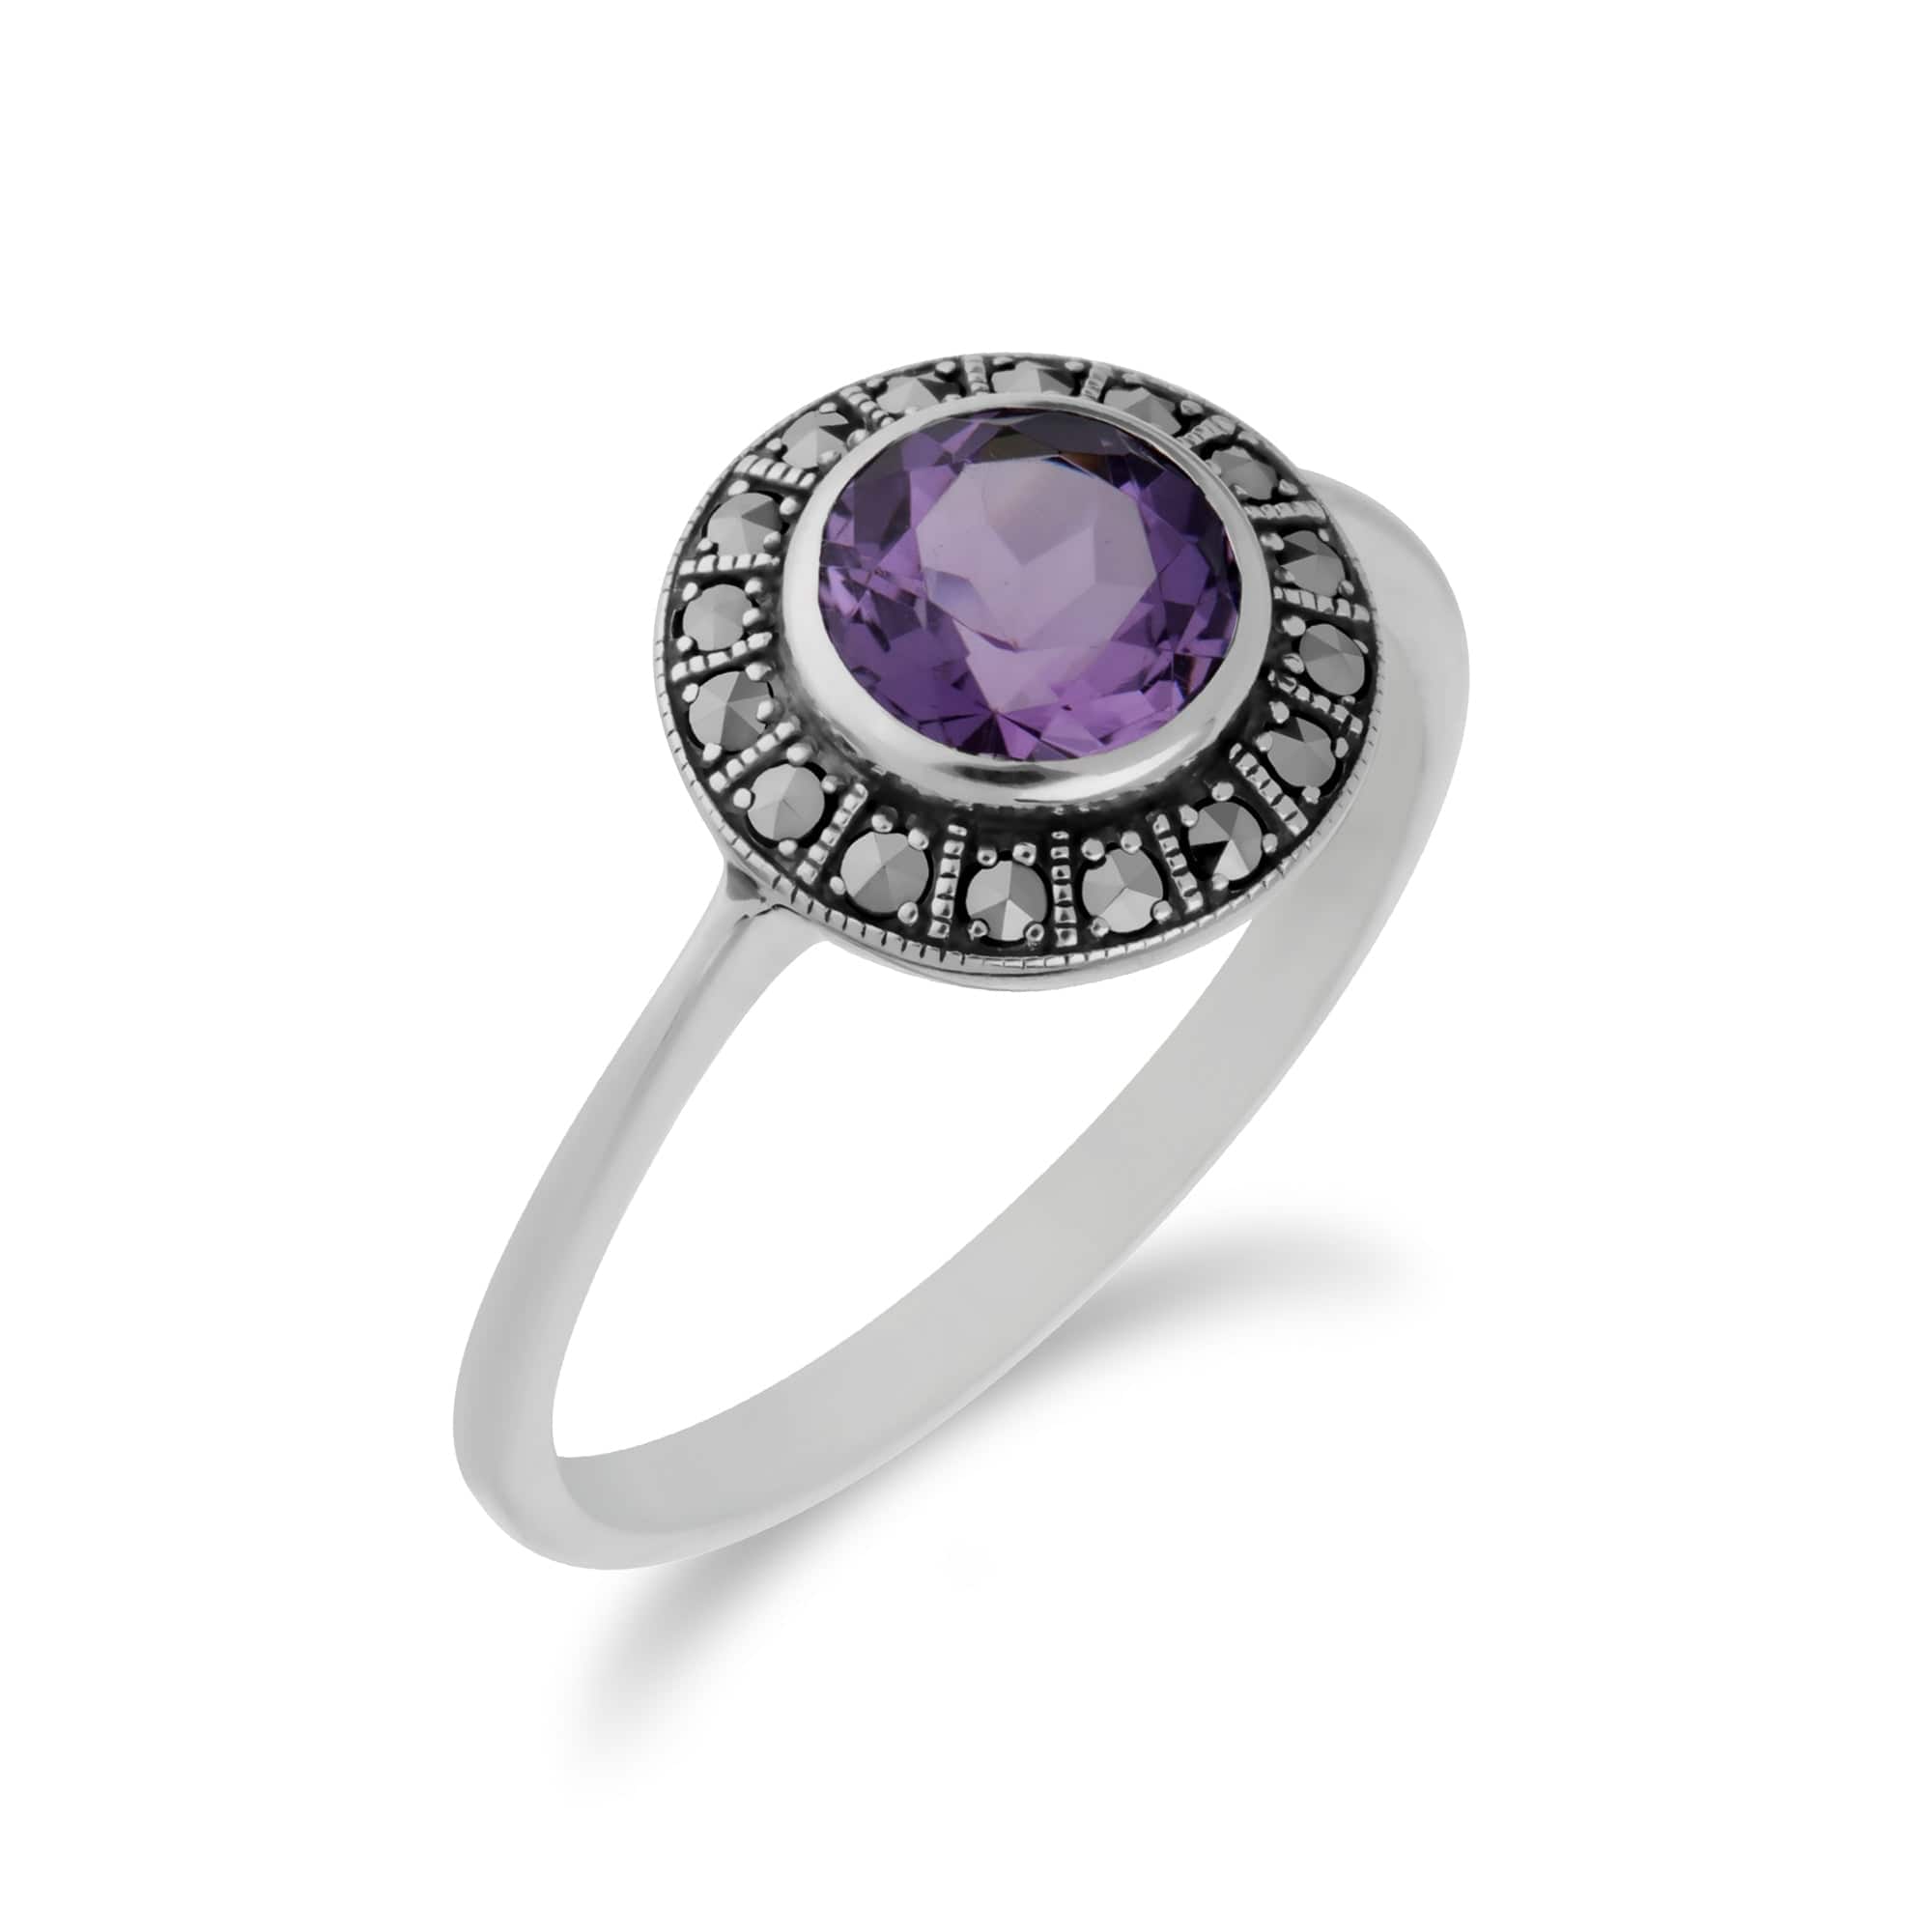 214R605601925 Art Deco Style Round Amethyst & Marcasite Halo Ring In Sterling Silver 2